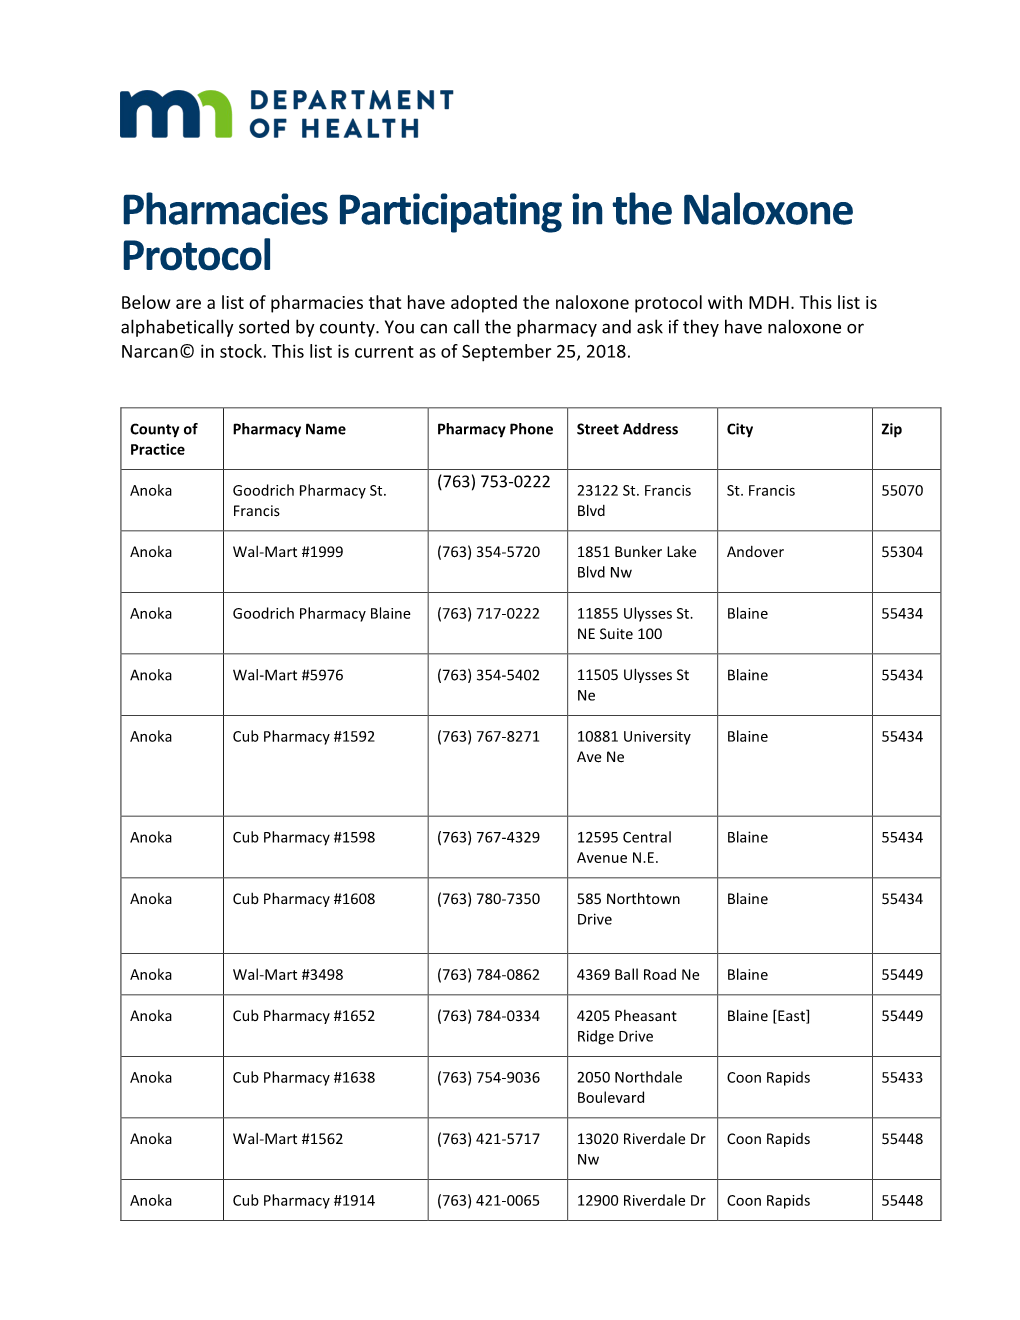 Pharmacies Participating in the Naloxone Protocol Below Are a List of Pharmacies That Have Adopted the Naloxone Protocol with MDH